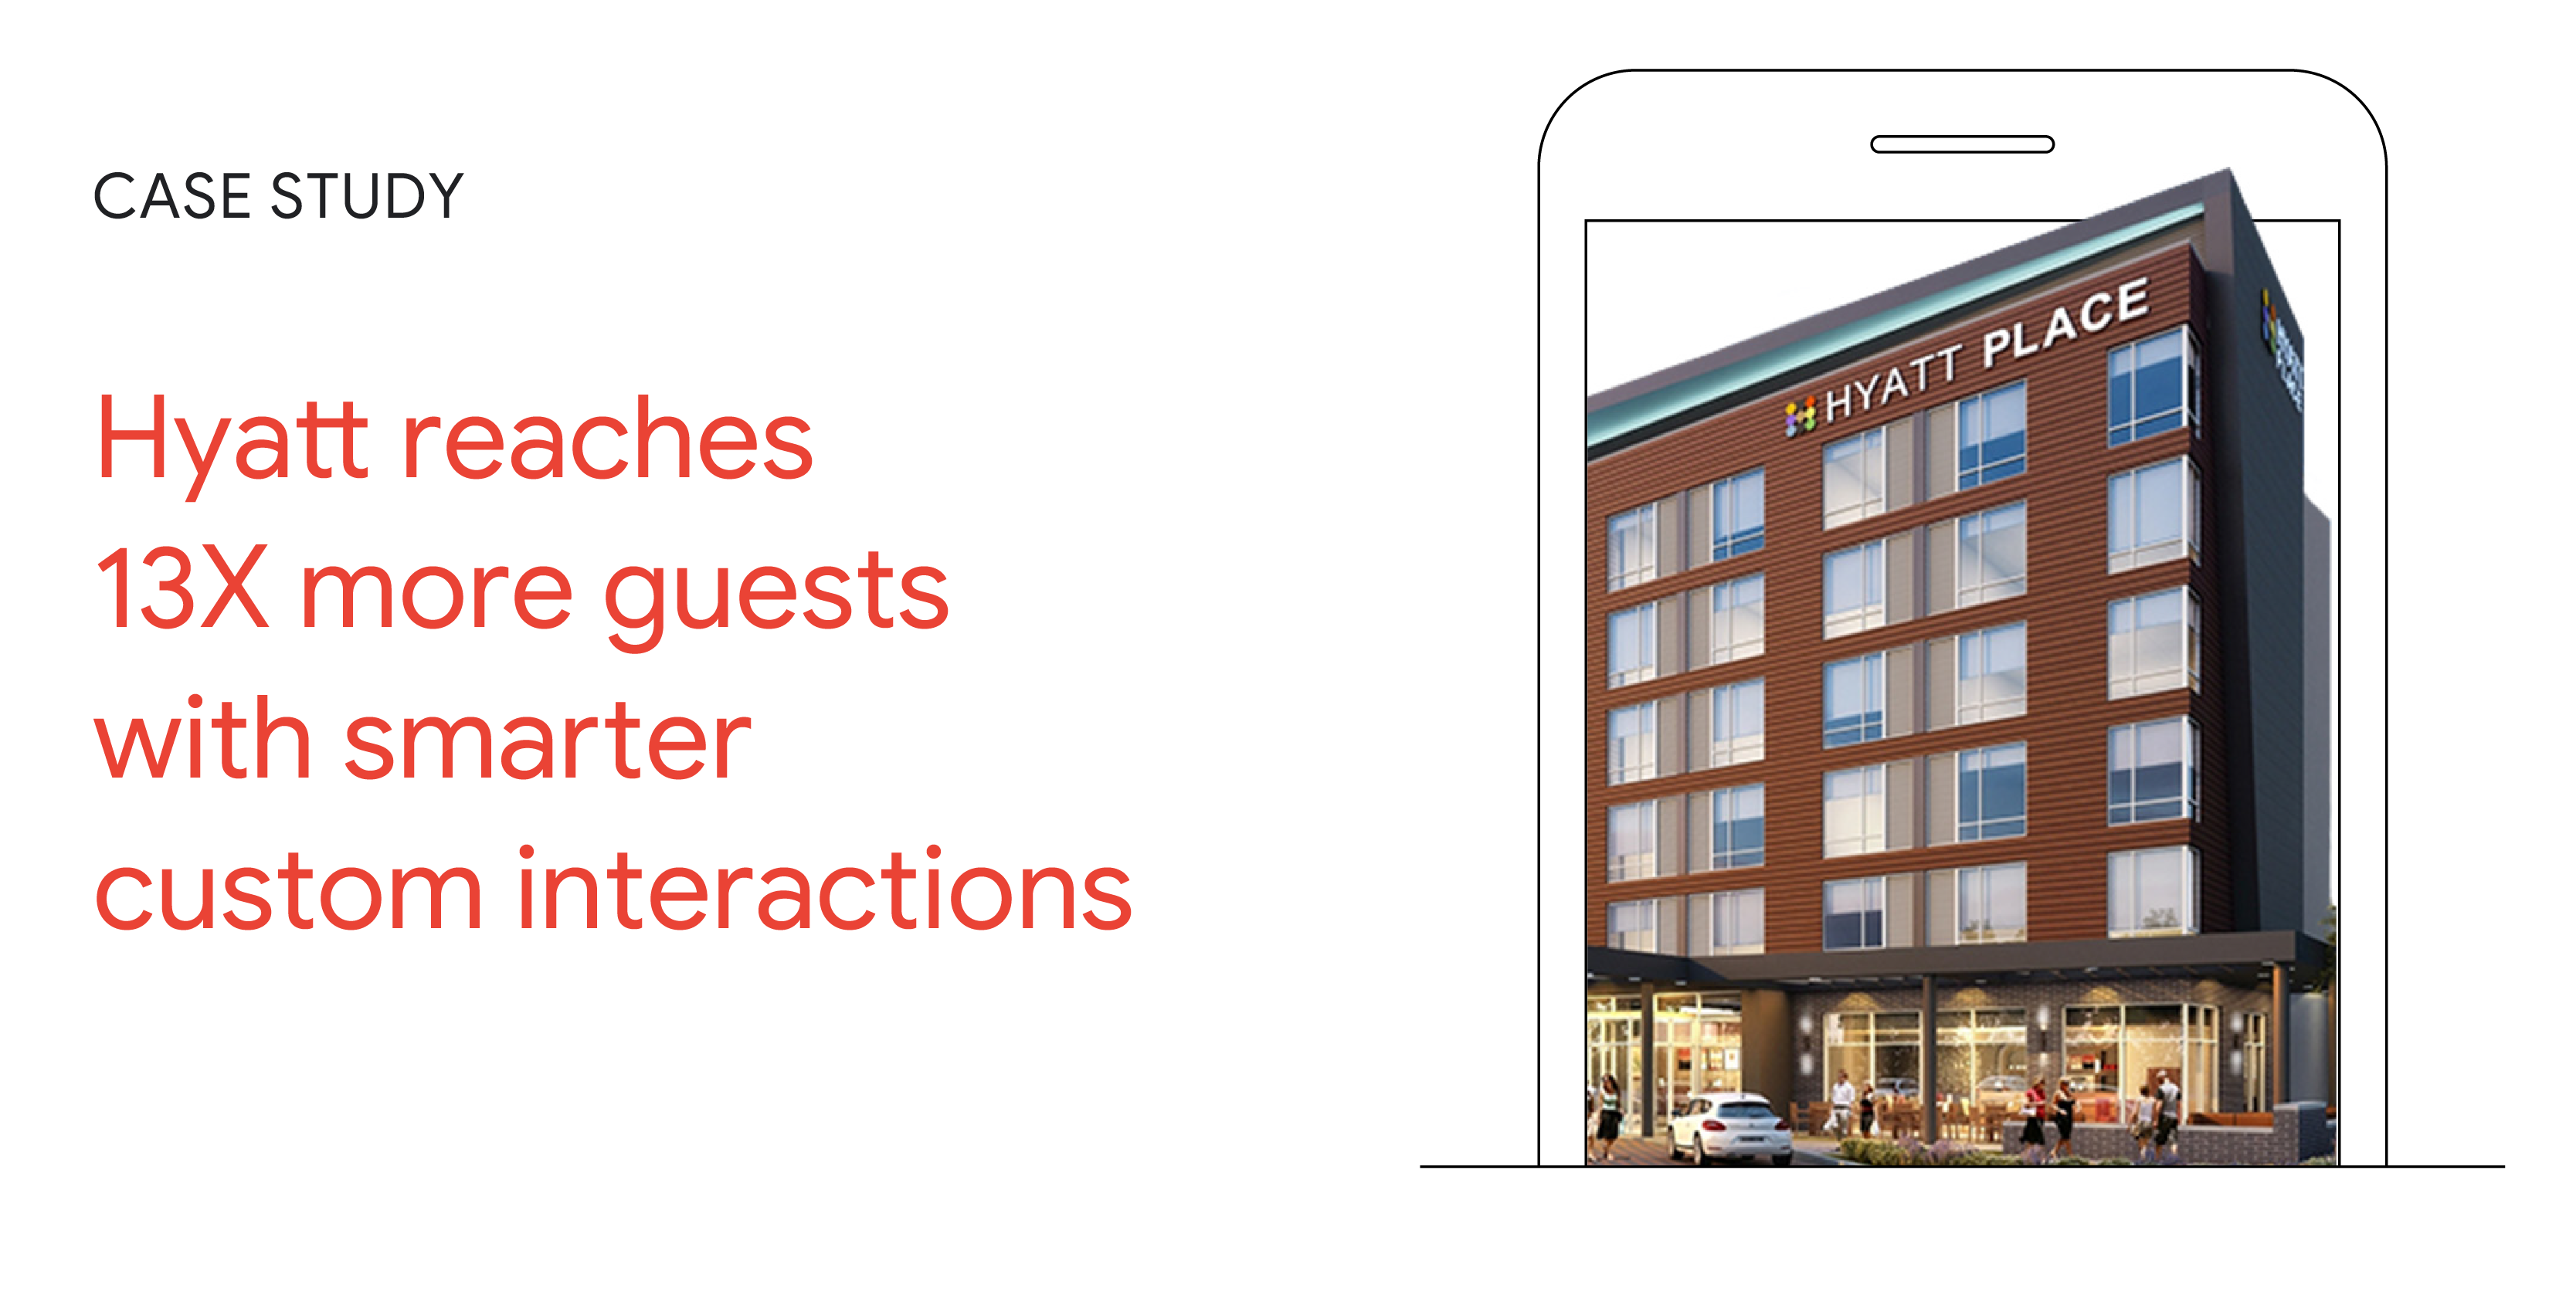 Case Study: Hyatt reaches 13X more guests with smarter custom interactions. A smartphone shows a Hyatt Place hotel building.